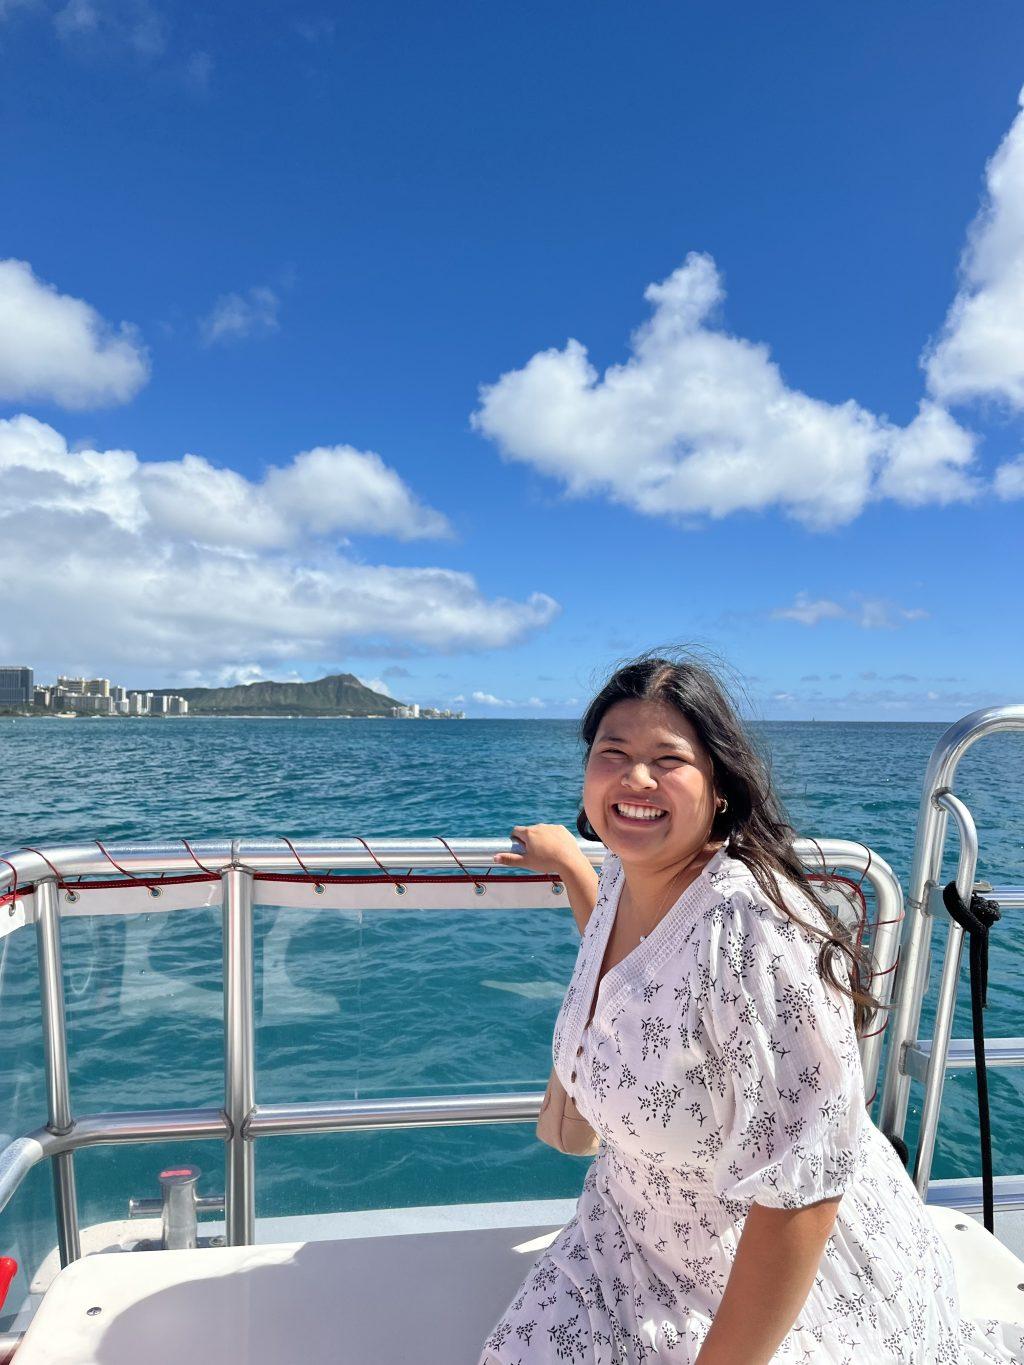 Kiaaina sails the Pacific Ocean along the shores of Waikiki Beach on March 4. The boat contained a glass bottom that revealed a variety of marine life such as fish and green sea turtles. Photo courtesy of Kala'i Kiaaina